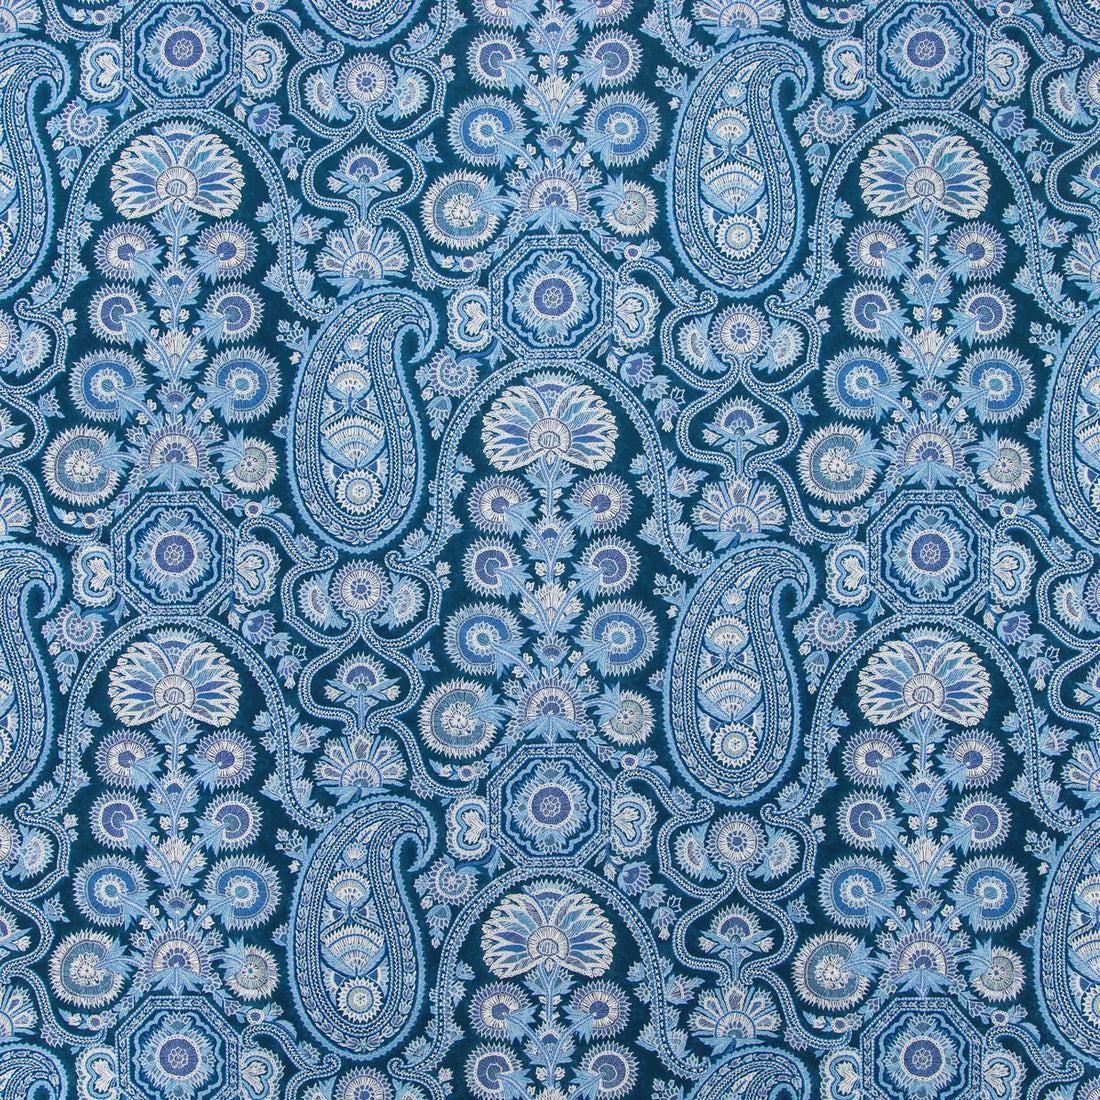 Saraya Print fabric in indigo color - pattern 8020100.5055.0 - by Brunschwig &amp; Fils in the Grand Bazaar collection